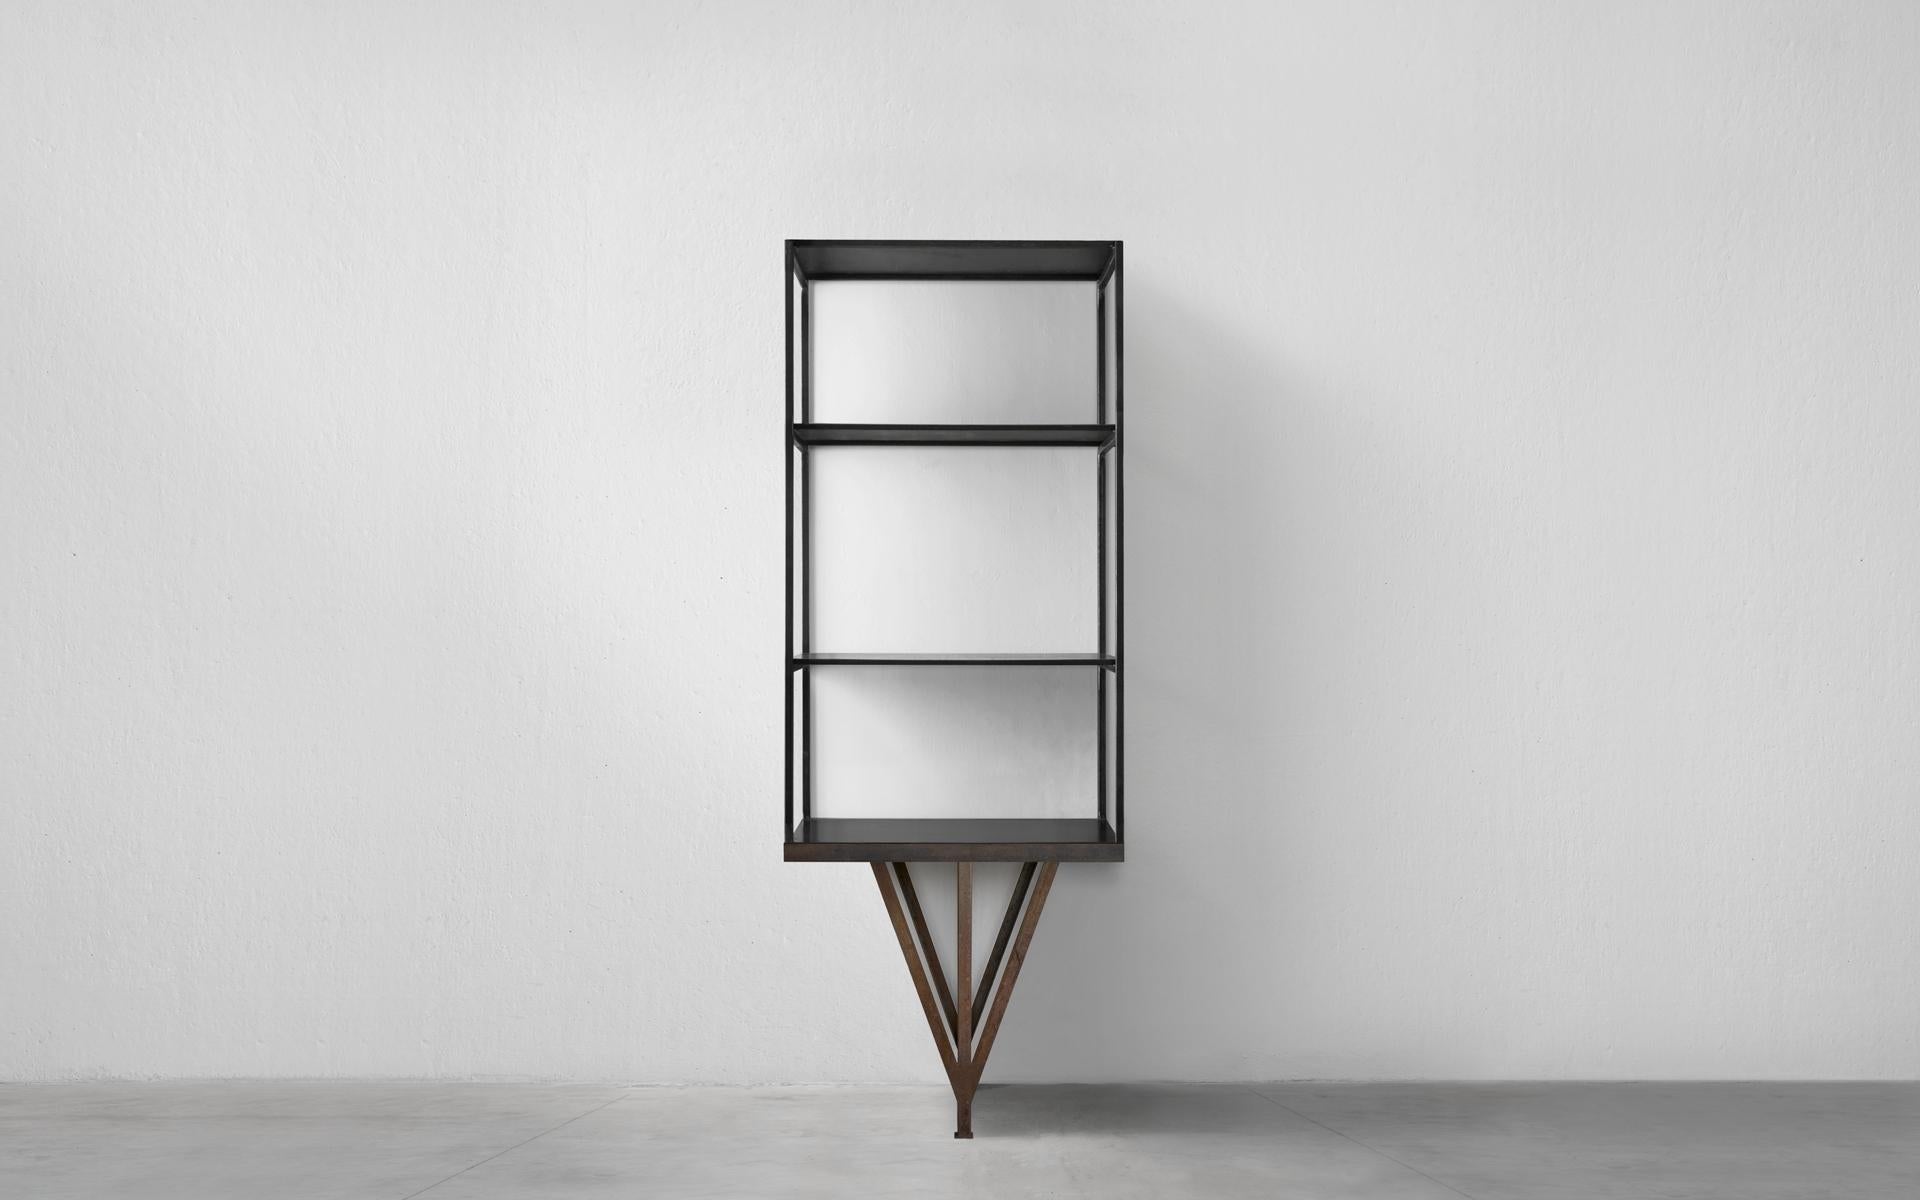 Solo Shelves by Imperfettolab
Dimensions: 100 x 51 x H 250 cm
Materials: Metal

Imperfetto Lab
Who we are ? We are a family.
Verter Turroni, Emanuela Ravelli and our children Elia, Margherita and Eusebio.
All together, we are separate parts